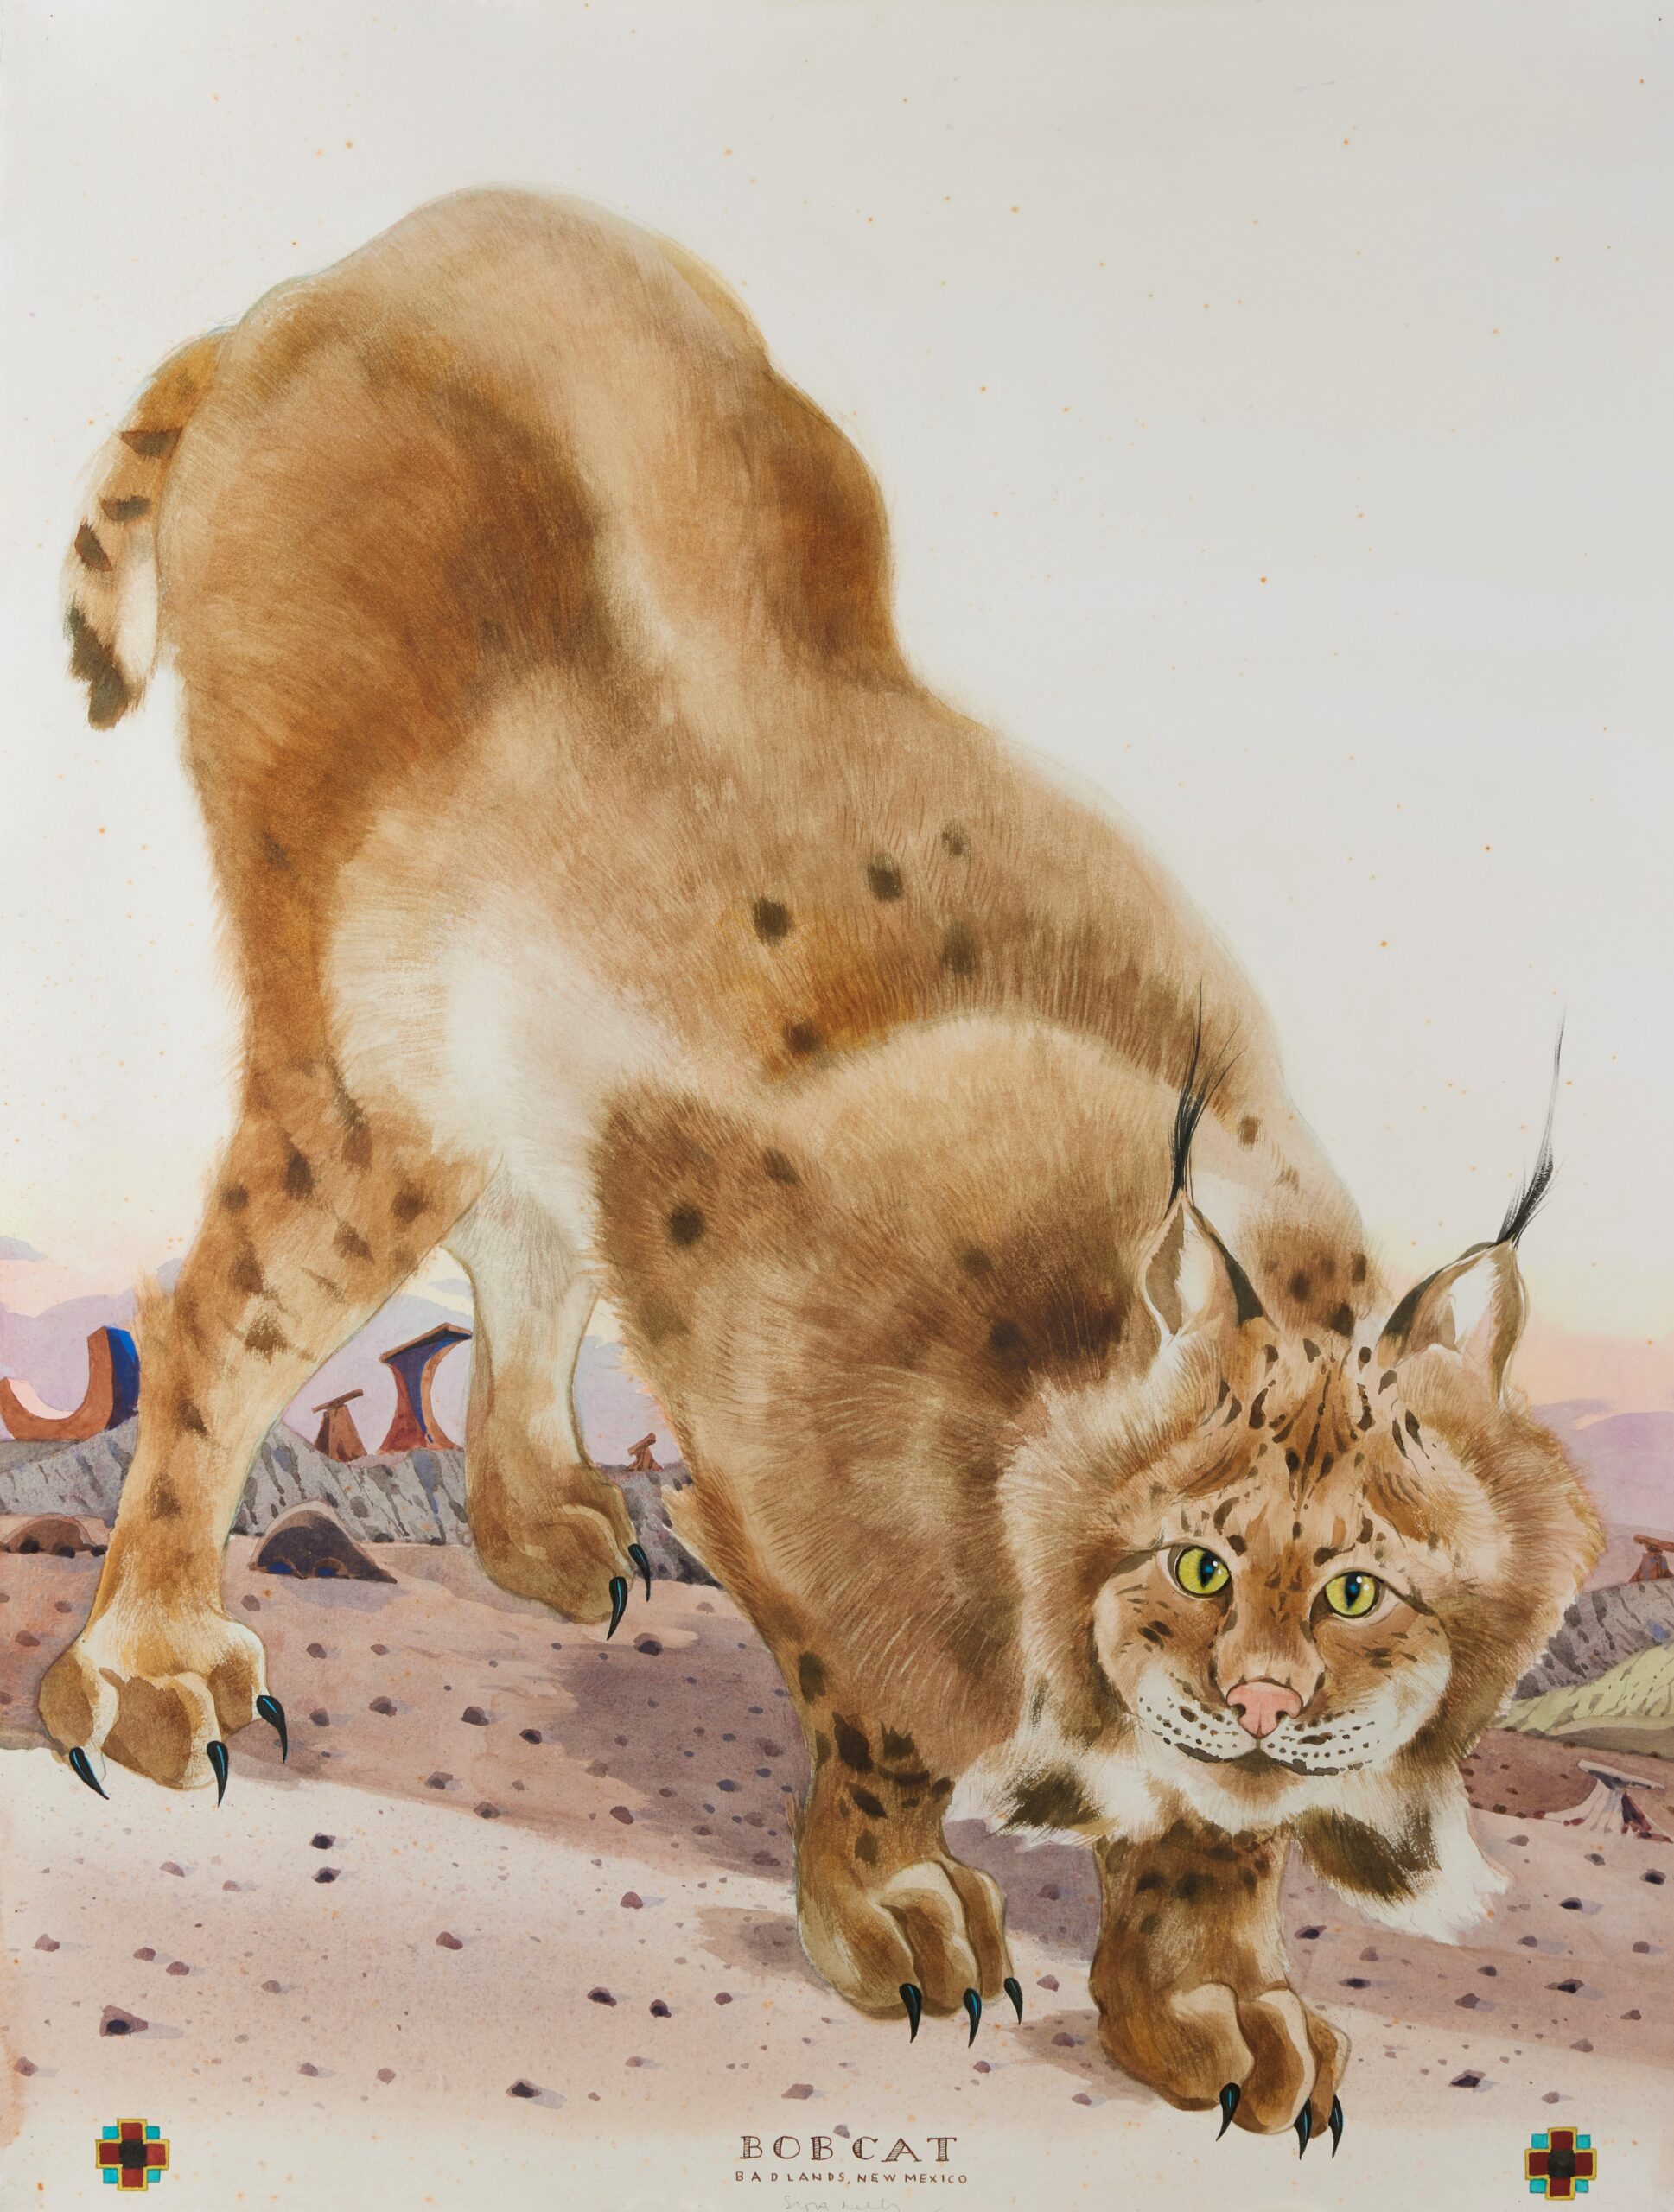 
							

									Scott Kelley									Bobcat 									watercolor, gouache and graphite on paper<br />
40 x 30 inches									


							